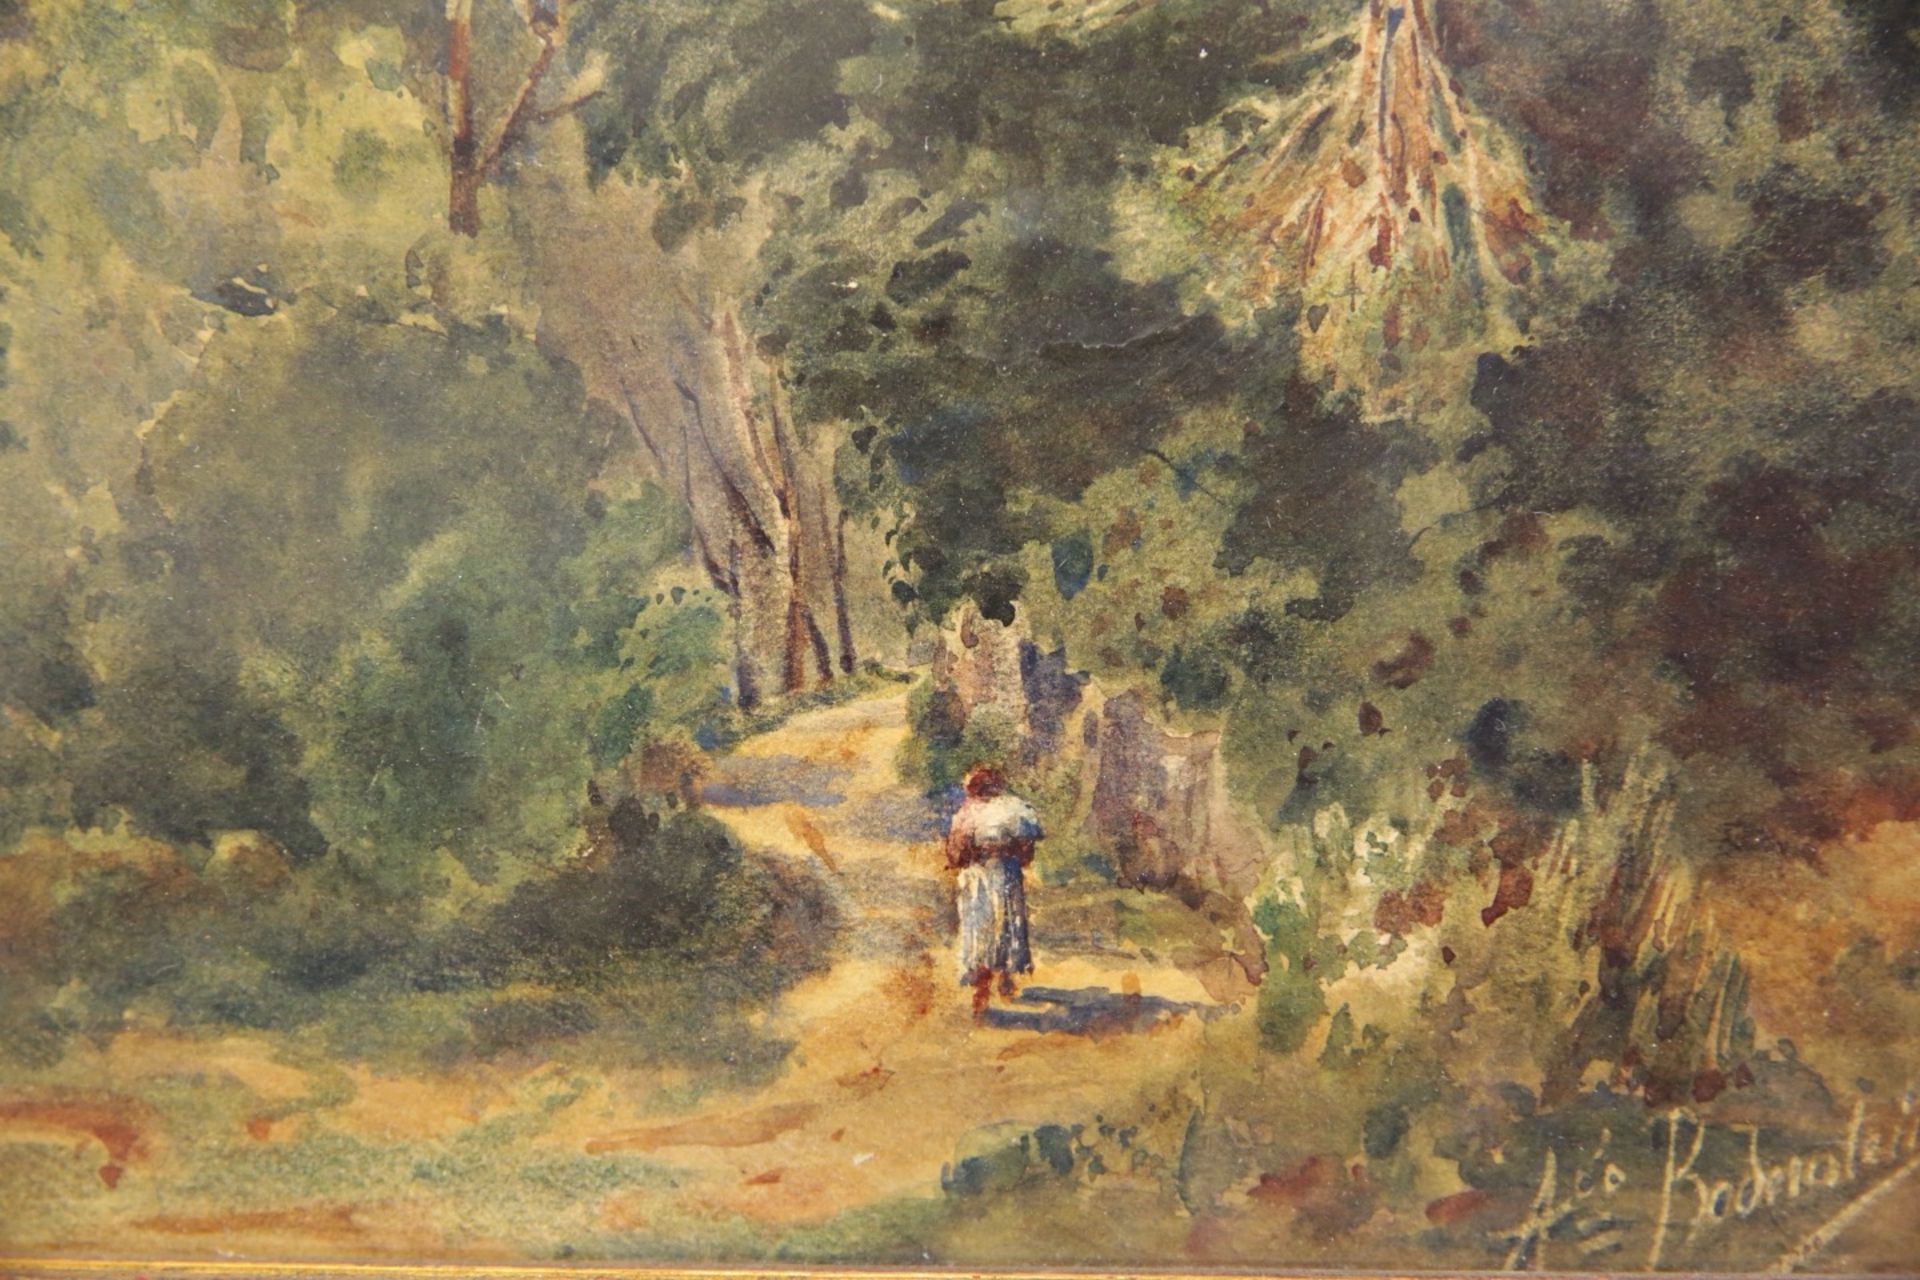 "Southern Landscape", signature not legible, watercolor on paper, French painting, 20th century. - Image 4 of 5